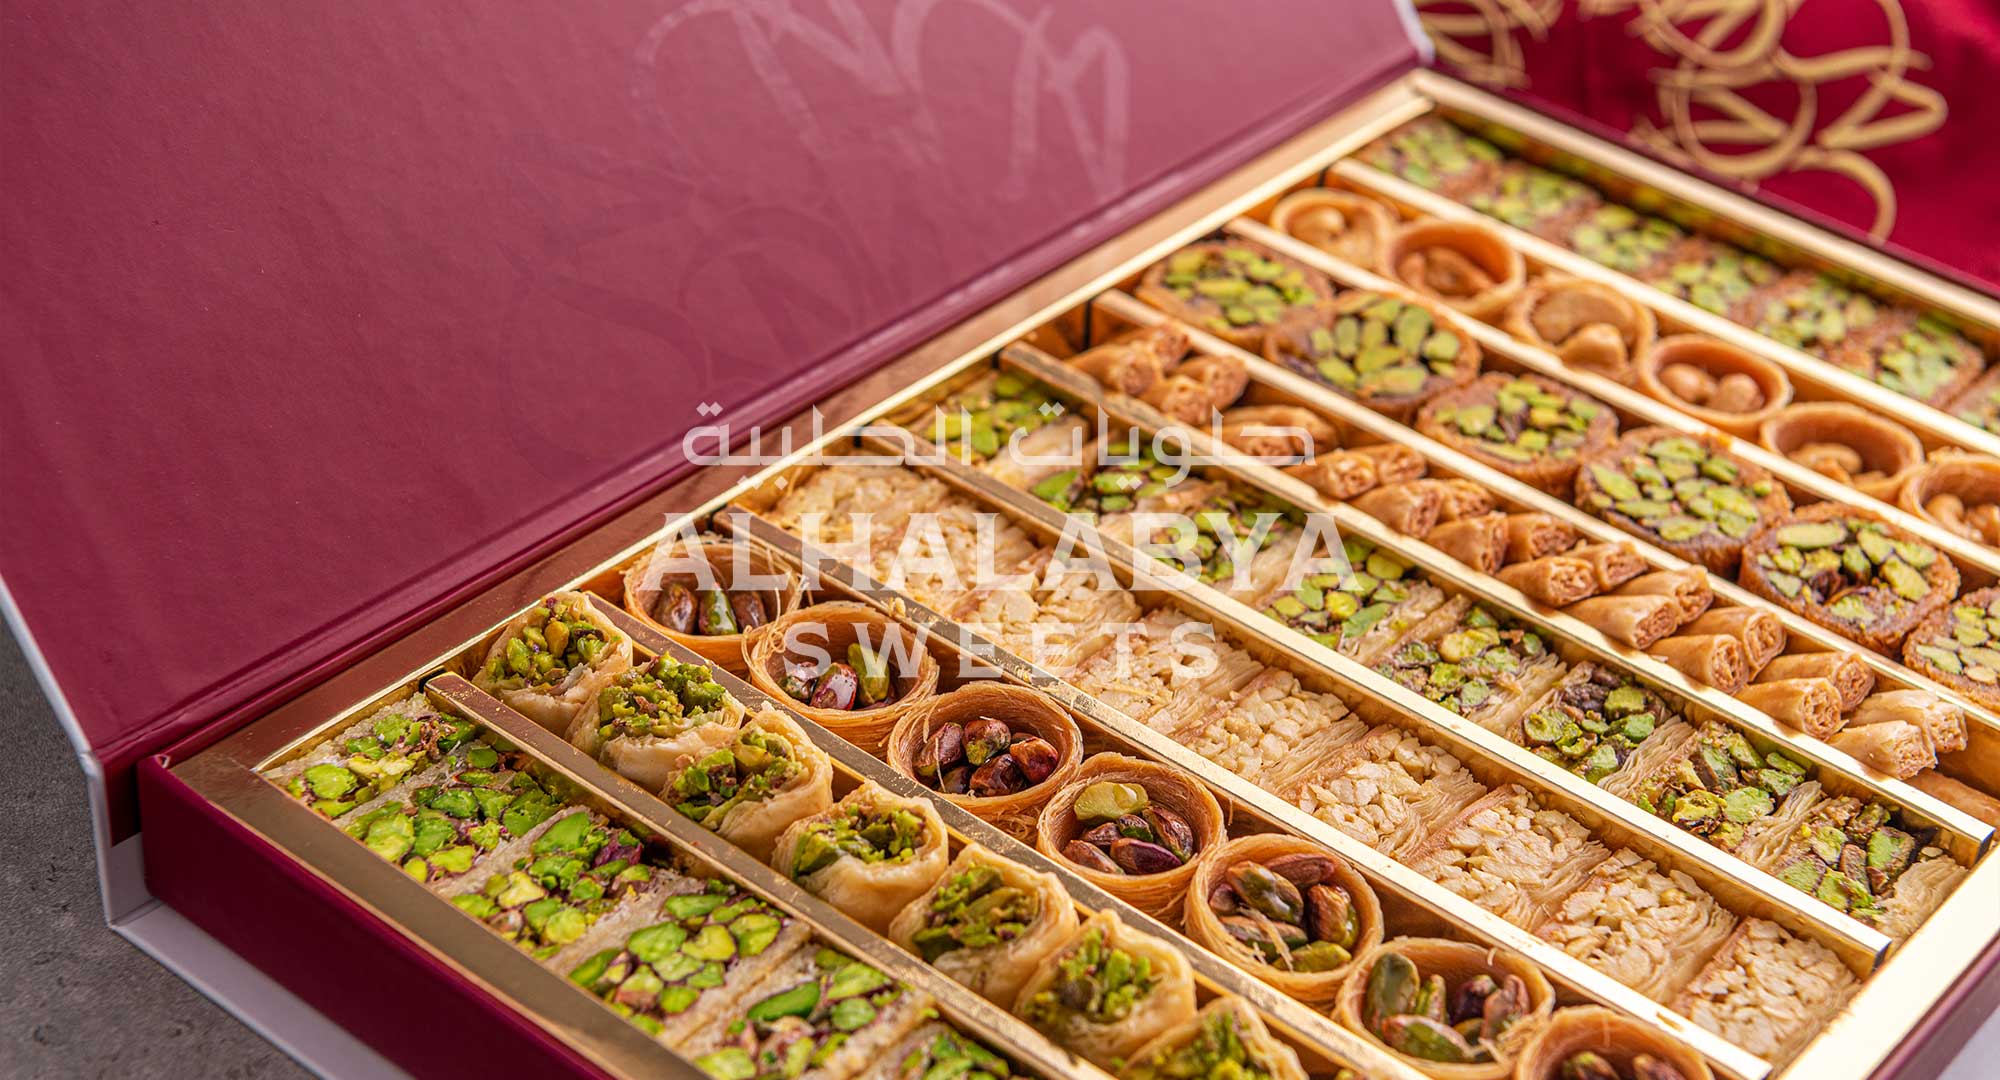 Al Halabya Sweets’ Commitment to Quality and Service